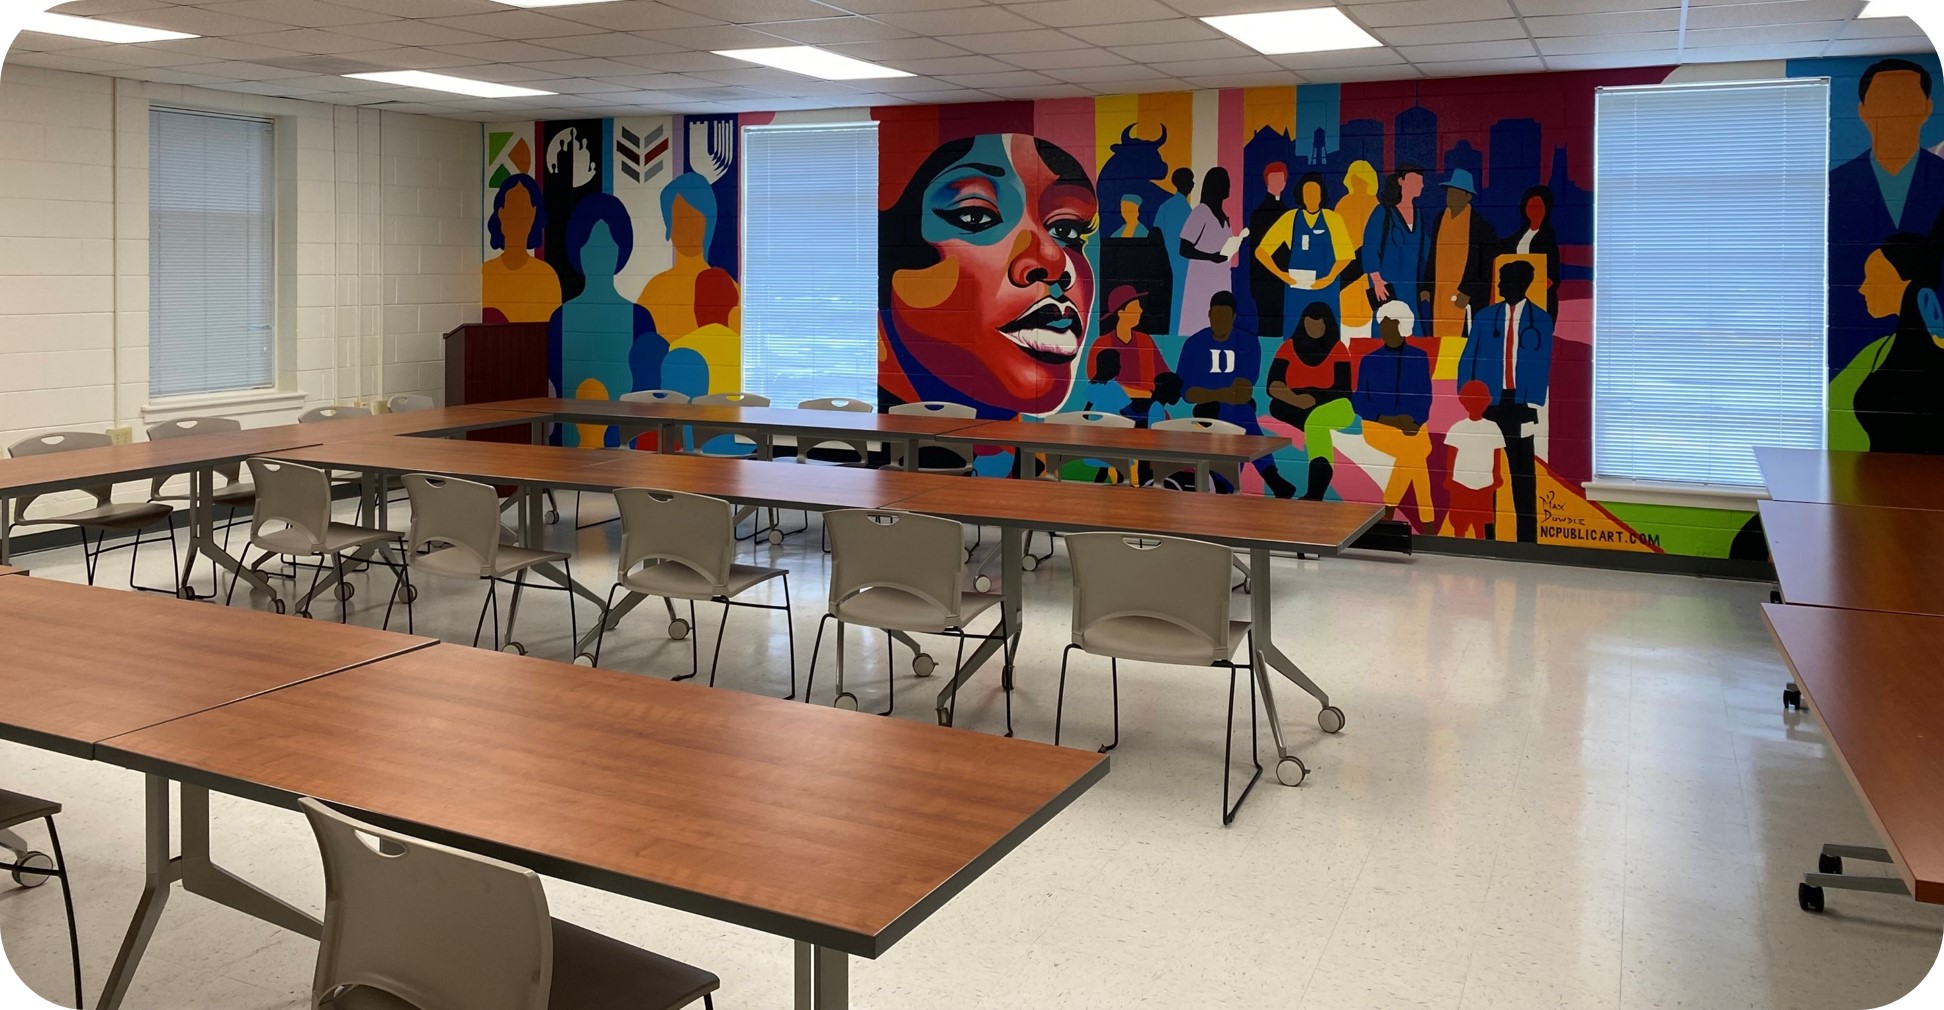 Image of a room with long tables, chairs and a mural along the farthest wall.